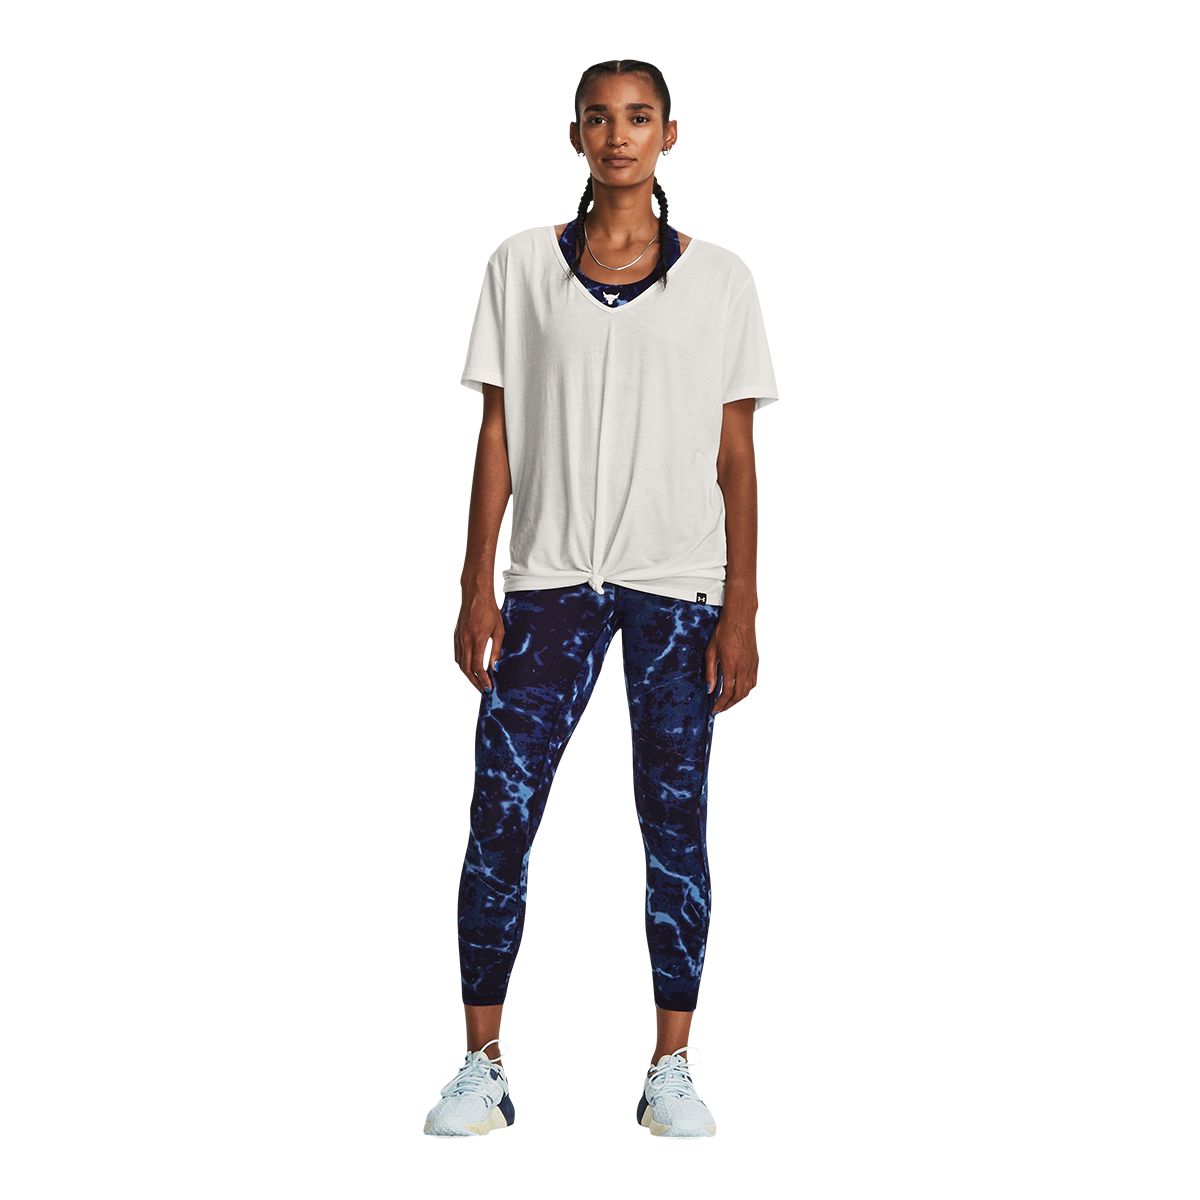 Under Armour Women's Project Rock LG Crossover Ankle PT Leggings